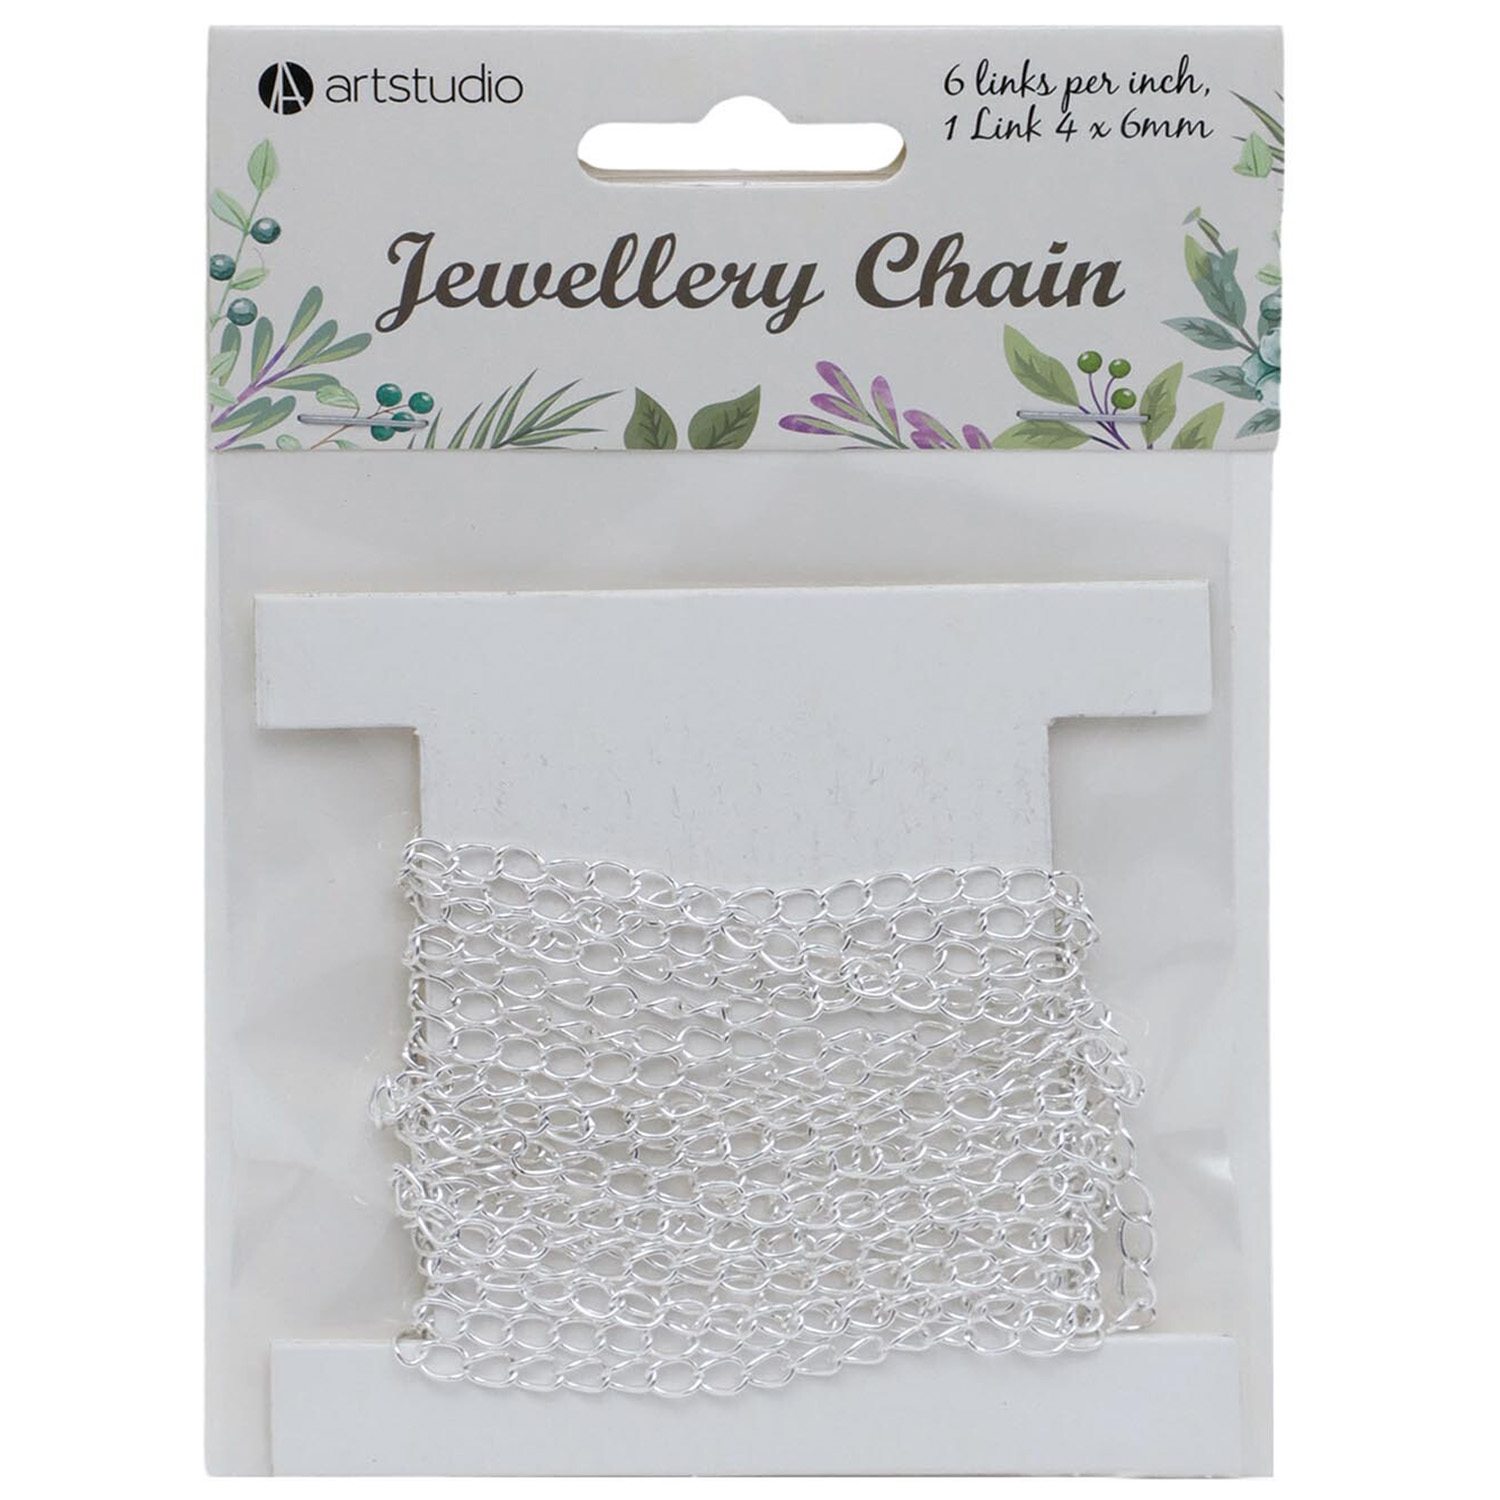 Jewellery Chain - Silver Image